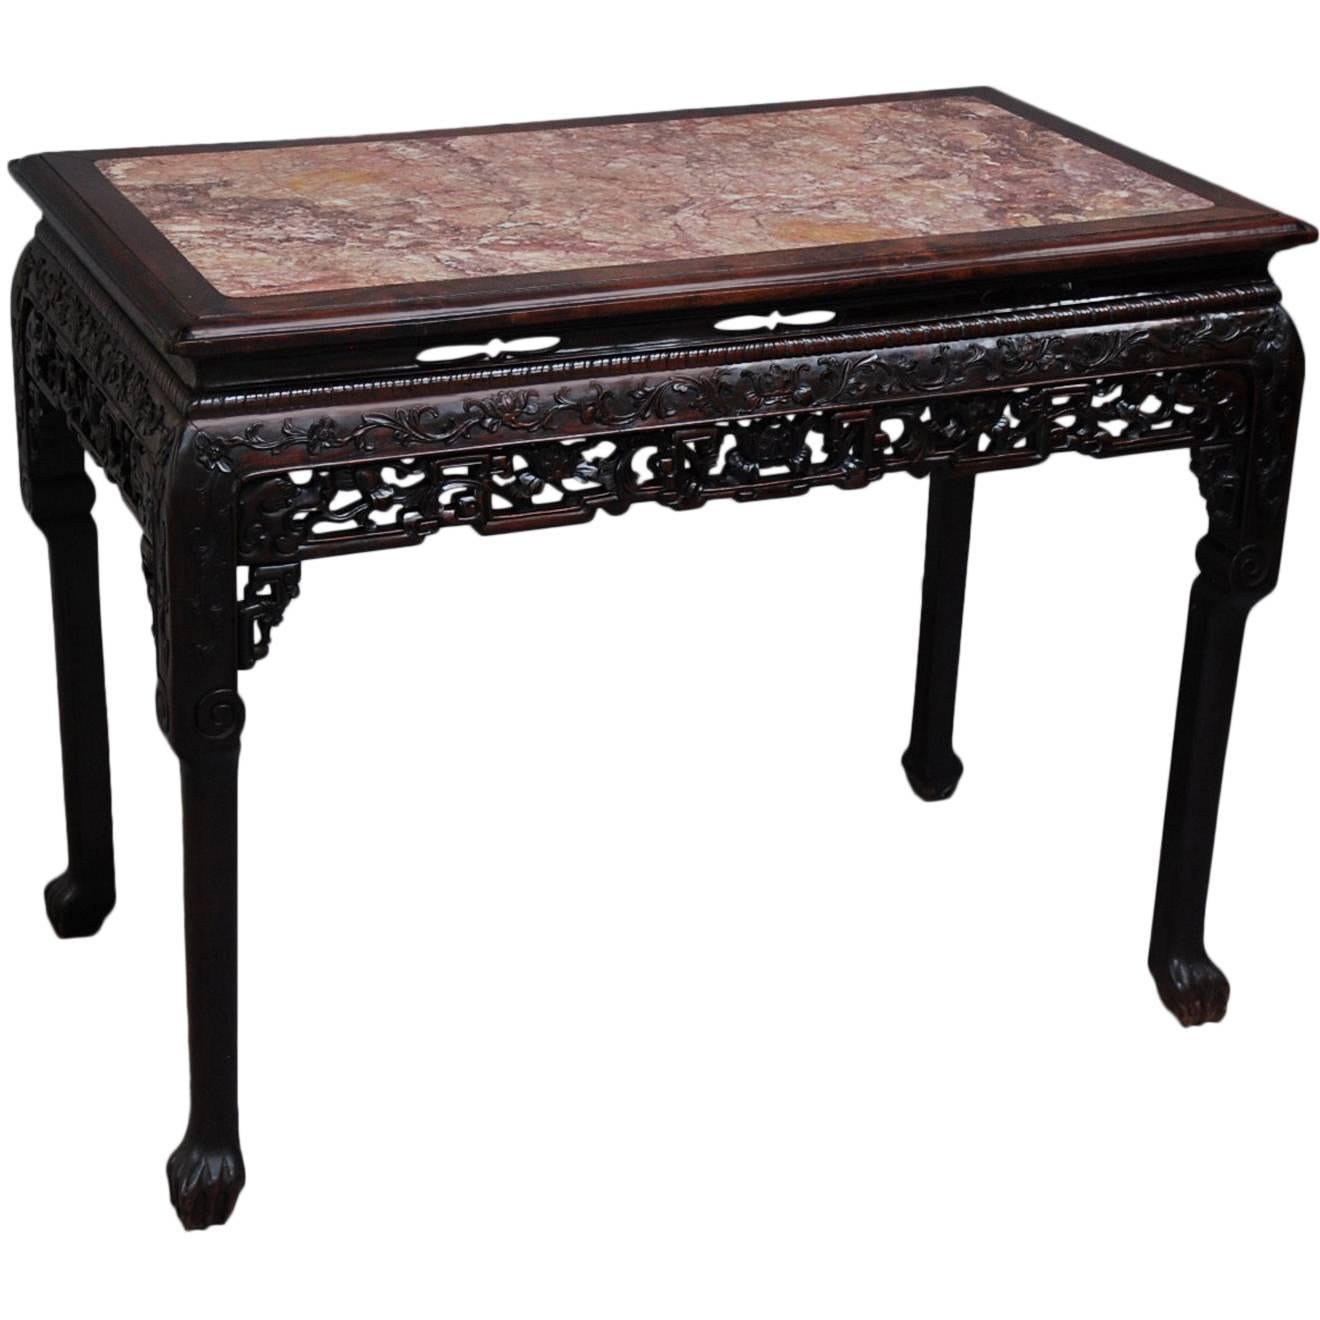 Superb Late 19th Century Qing Dynasty Chinese Centre Table with Marble Top For Sale